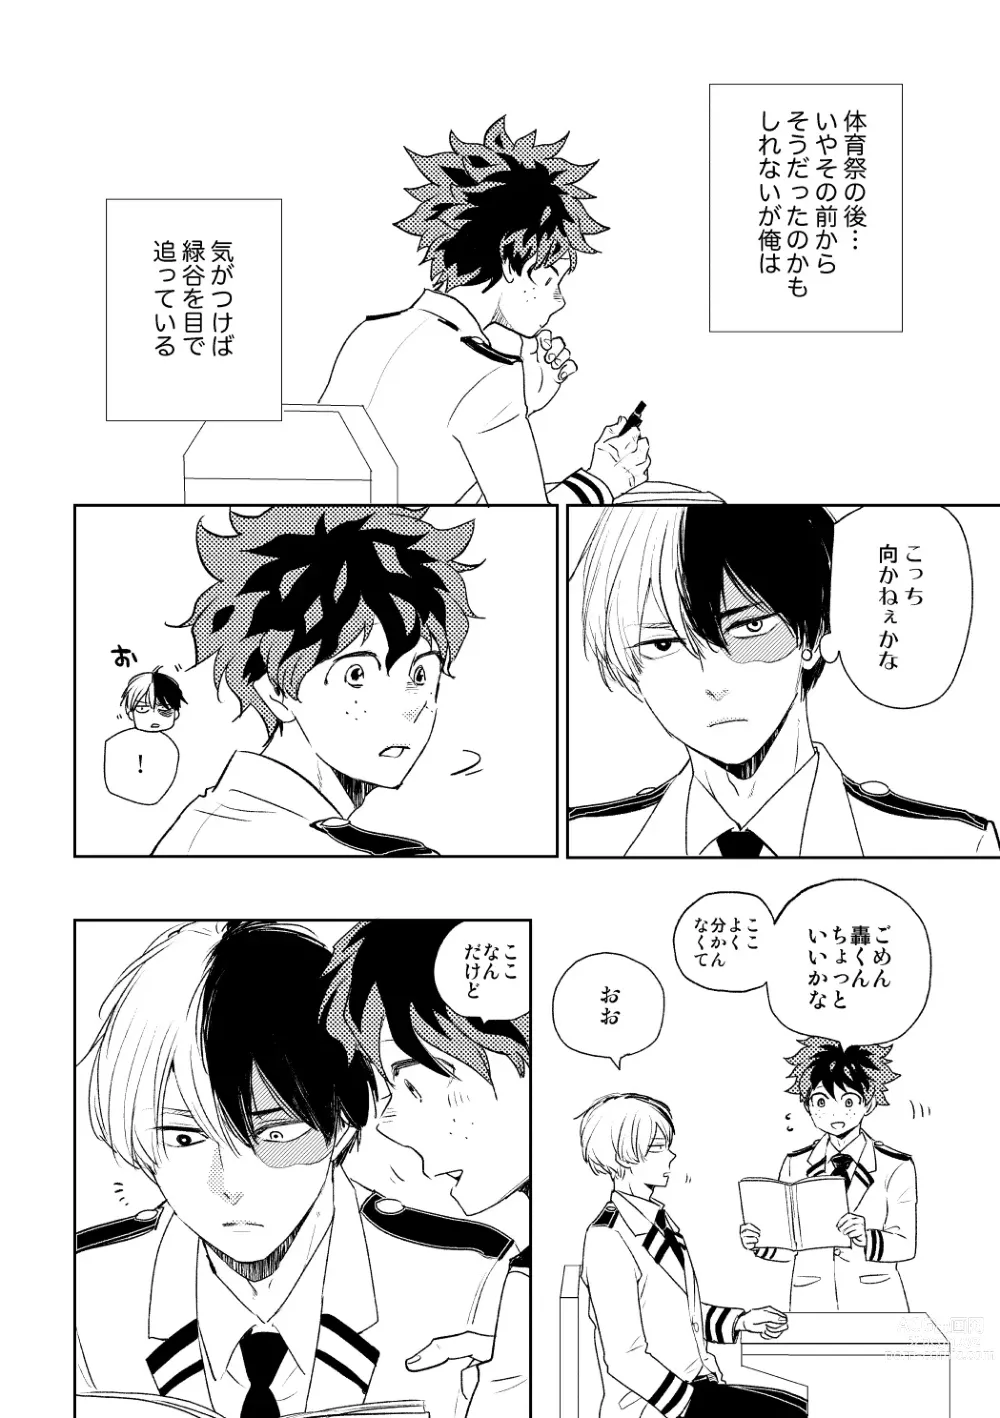 Page 3 of doujinshi DISTANCE